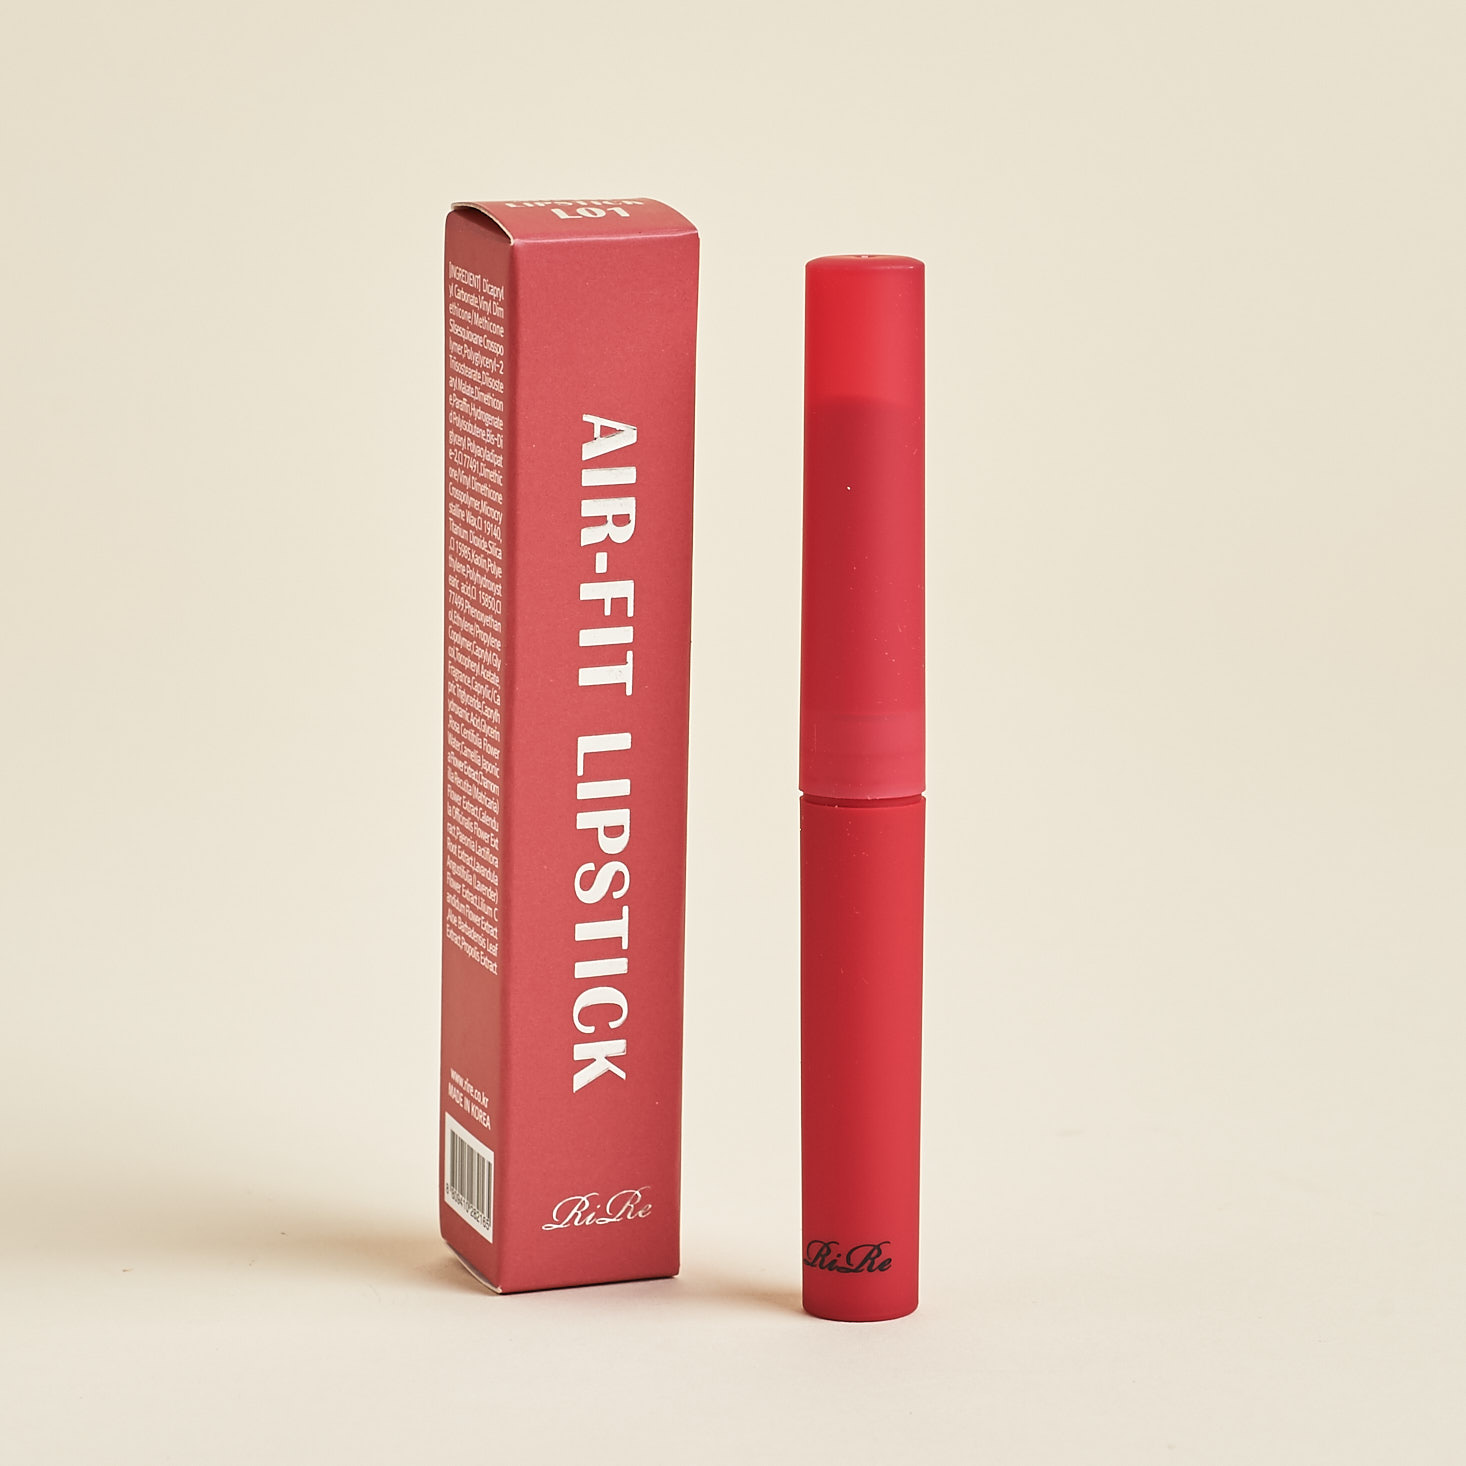 RiRe Air-Fit Velvet Lipstick in L01 with box